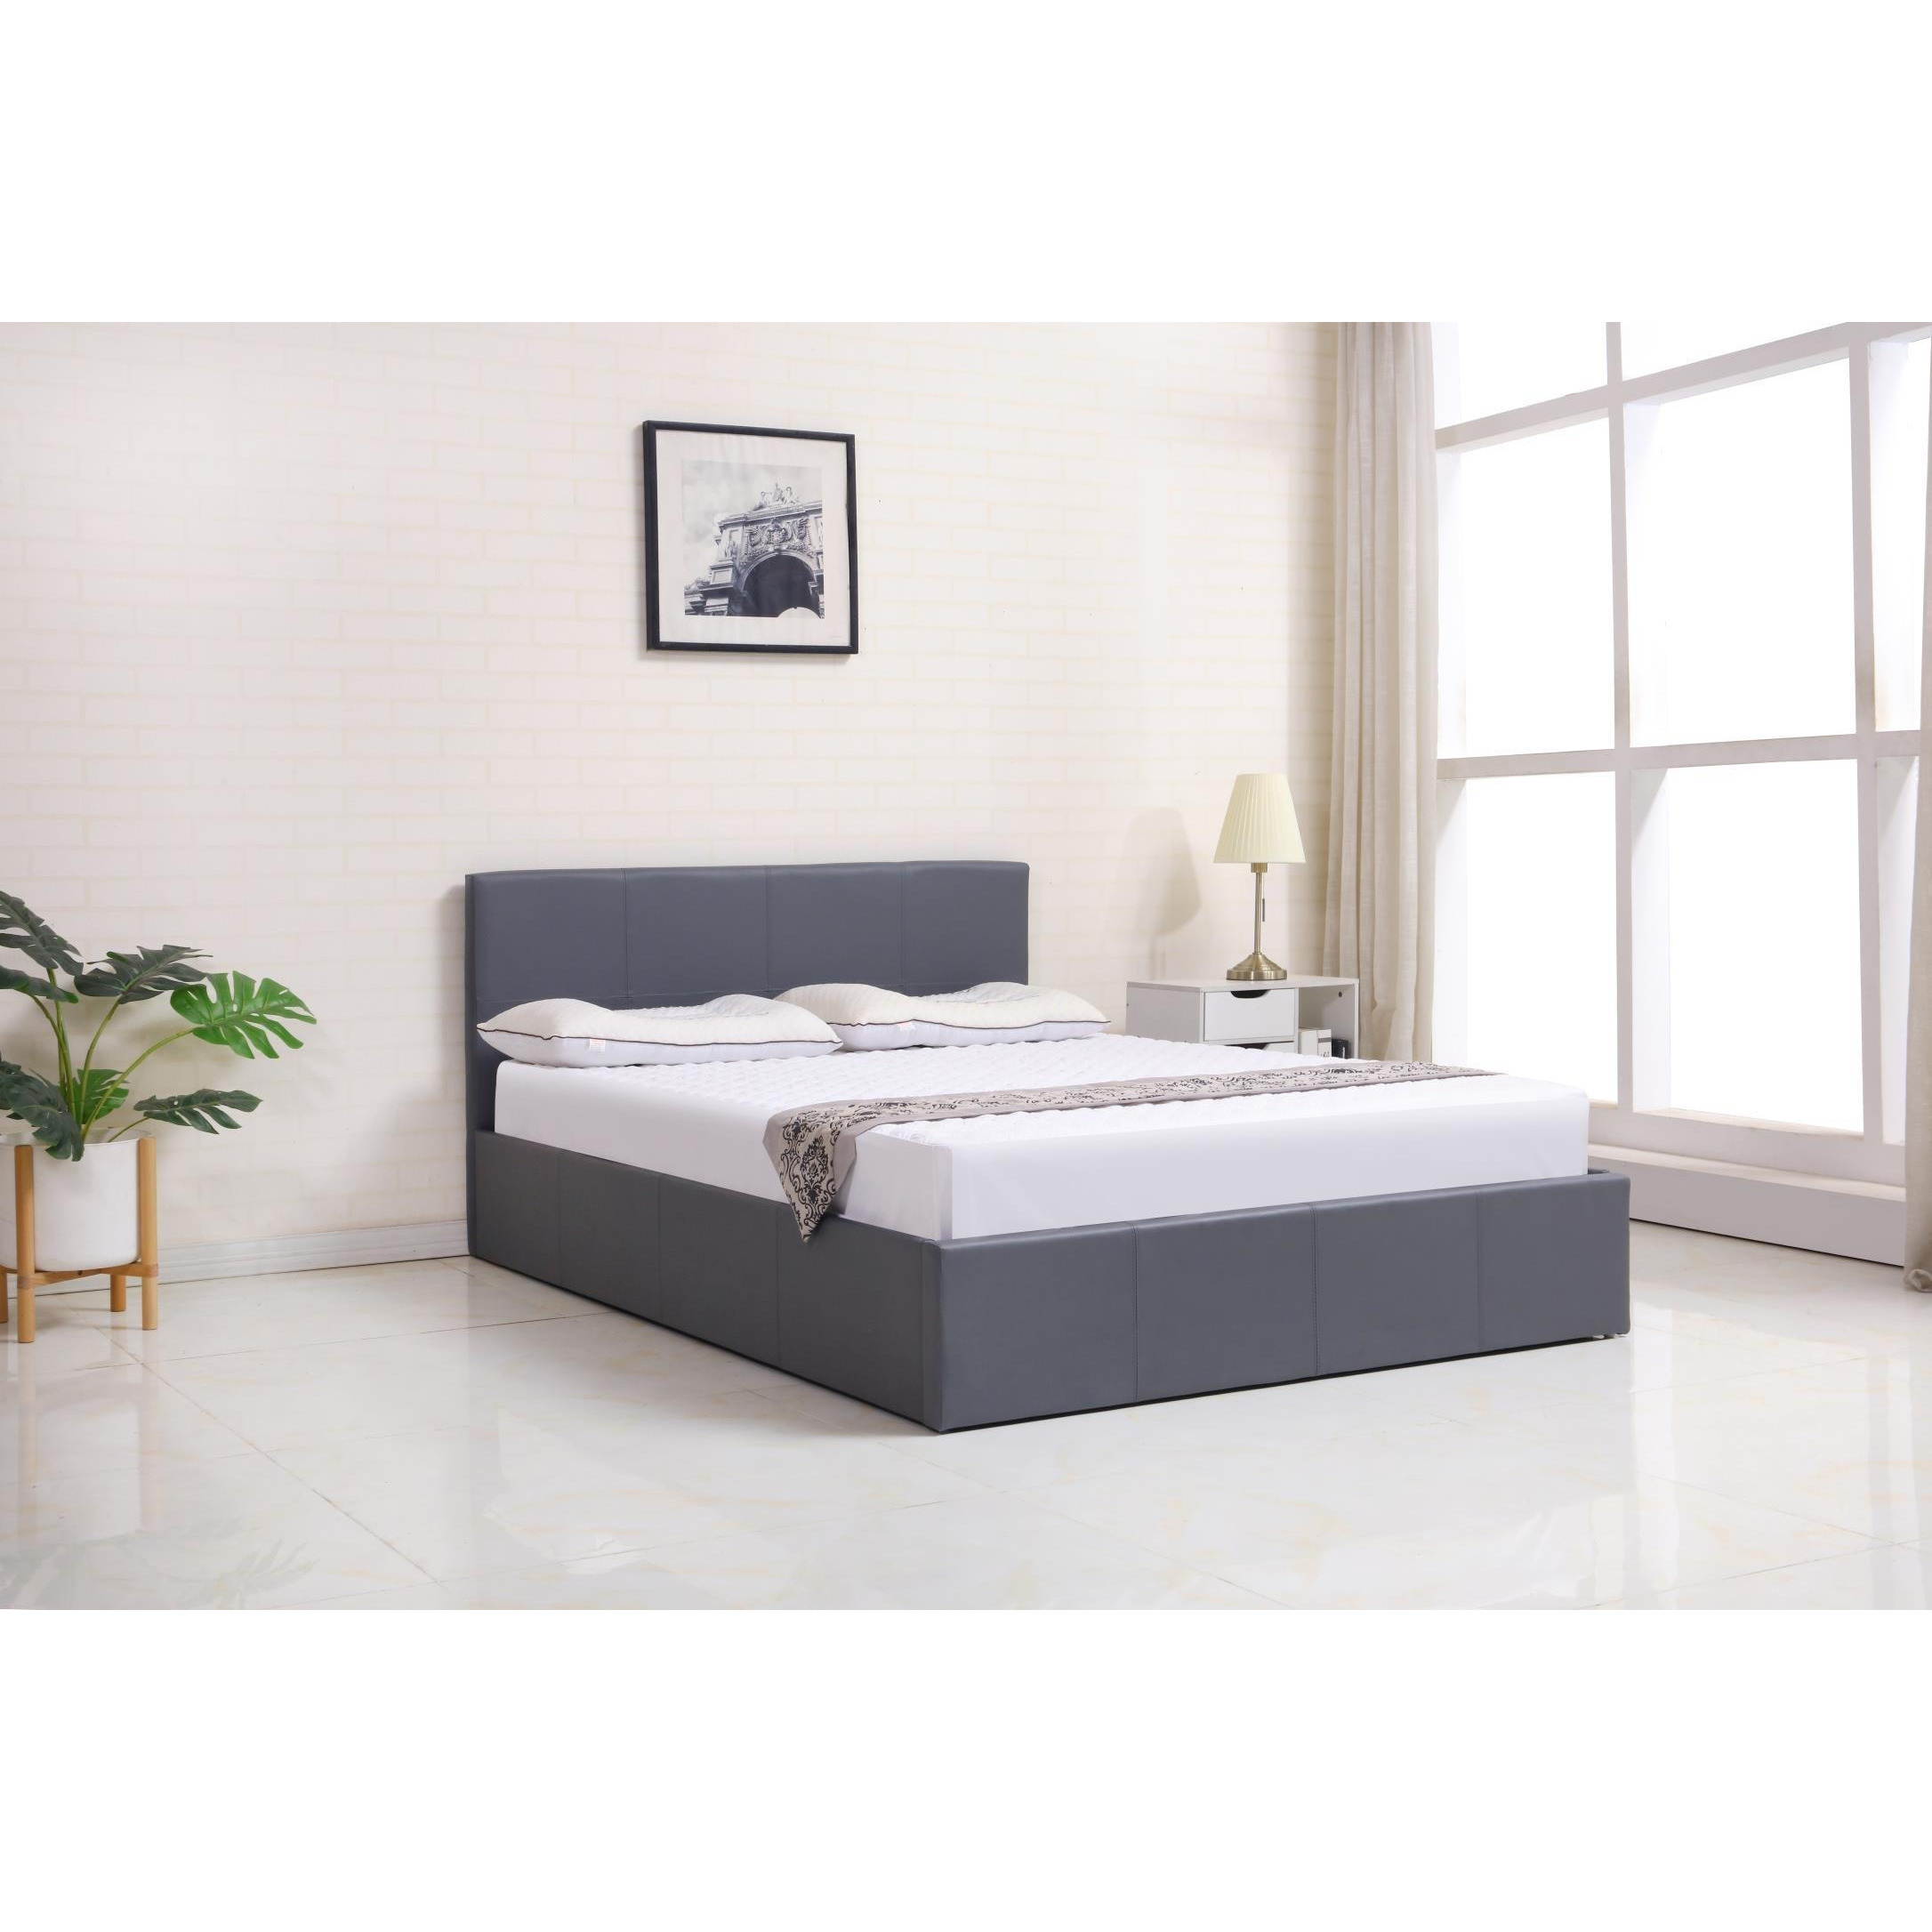 Ottoman Storage Leather Bed Side Lift 4FT6 Double Bed - image 1